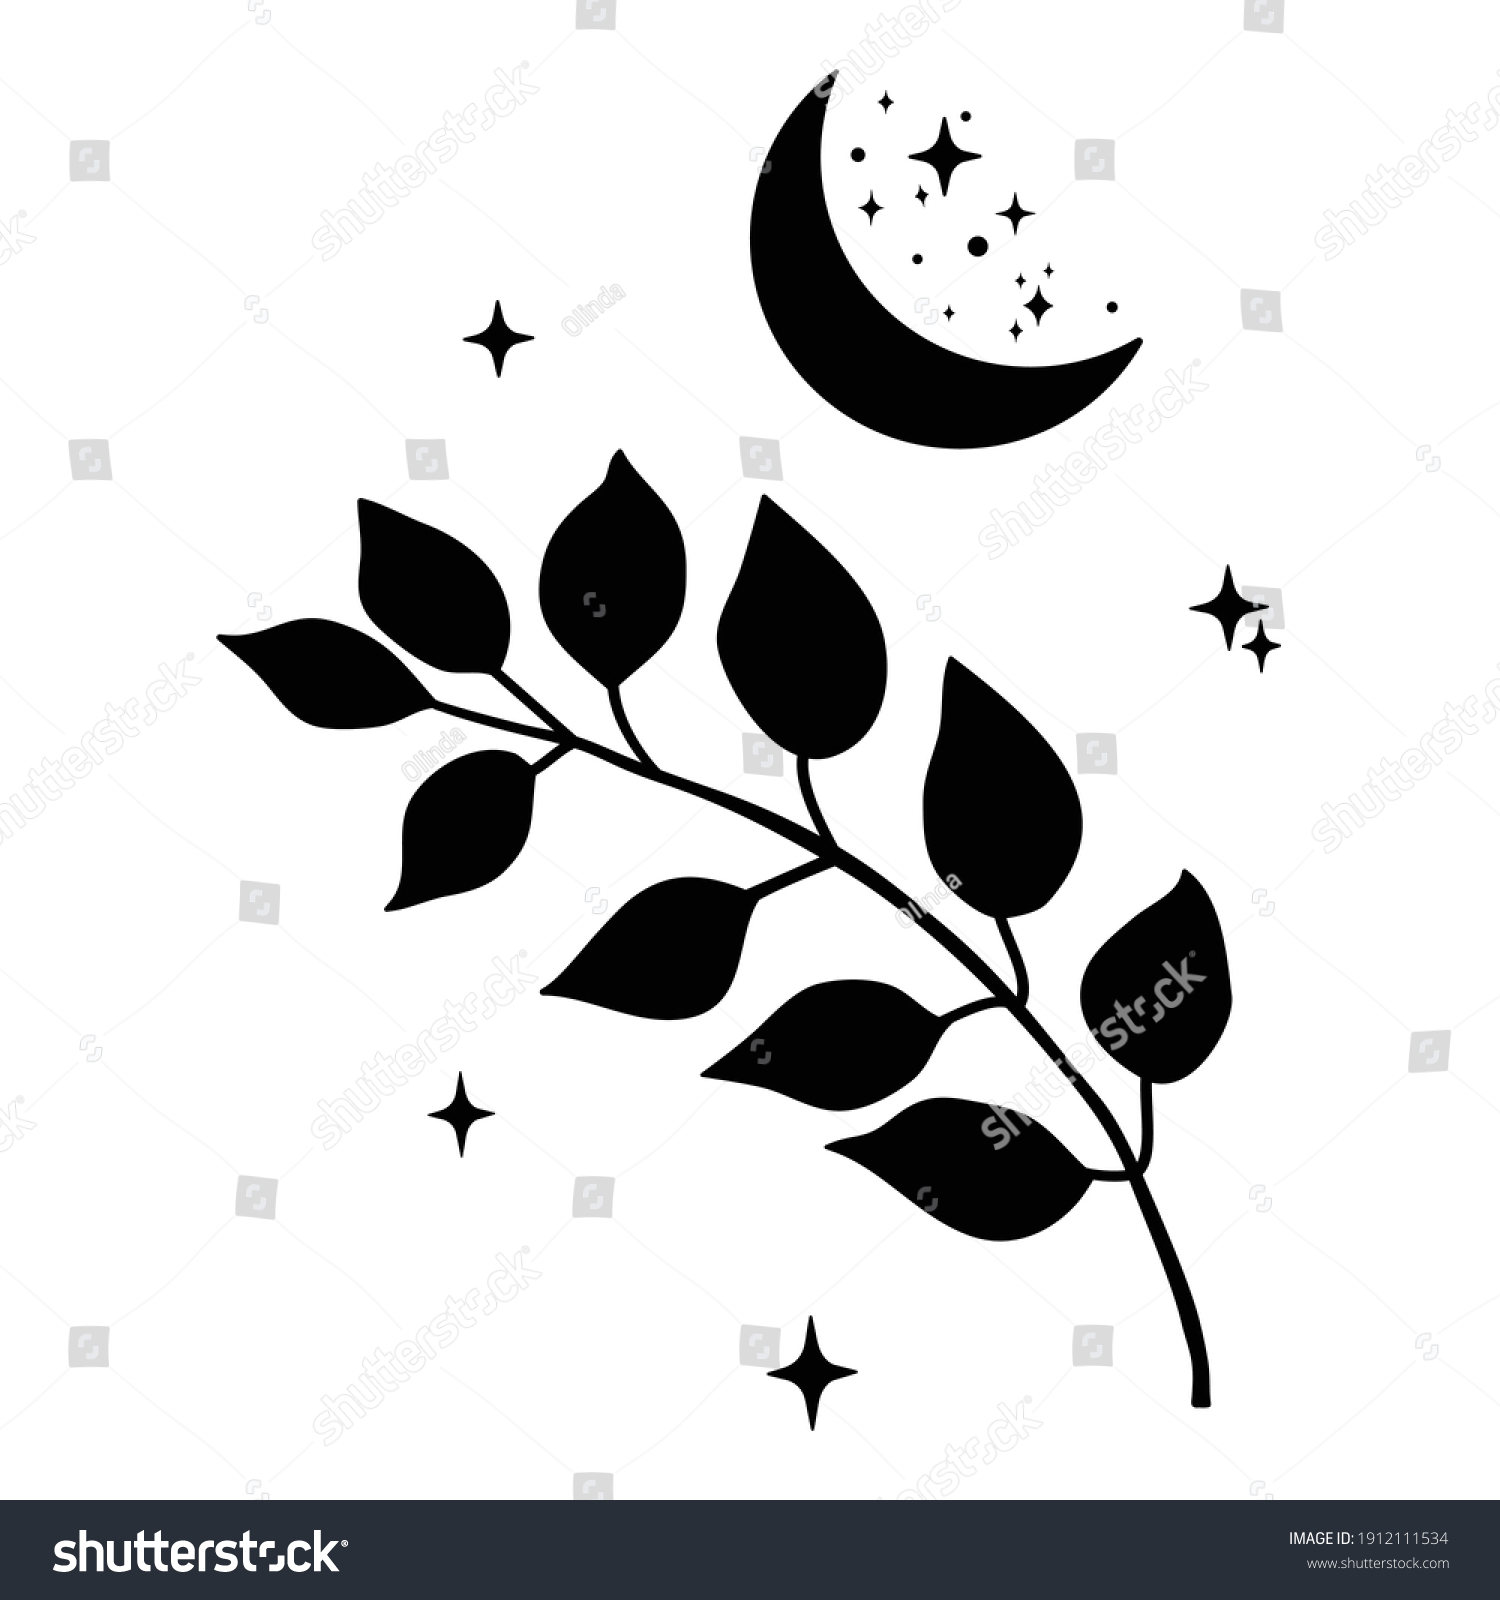 SVG of Black crescent moon with stars and branch. Design element for logos icons. Vector illustration. Modern Boho style doodle art svg